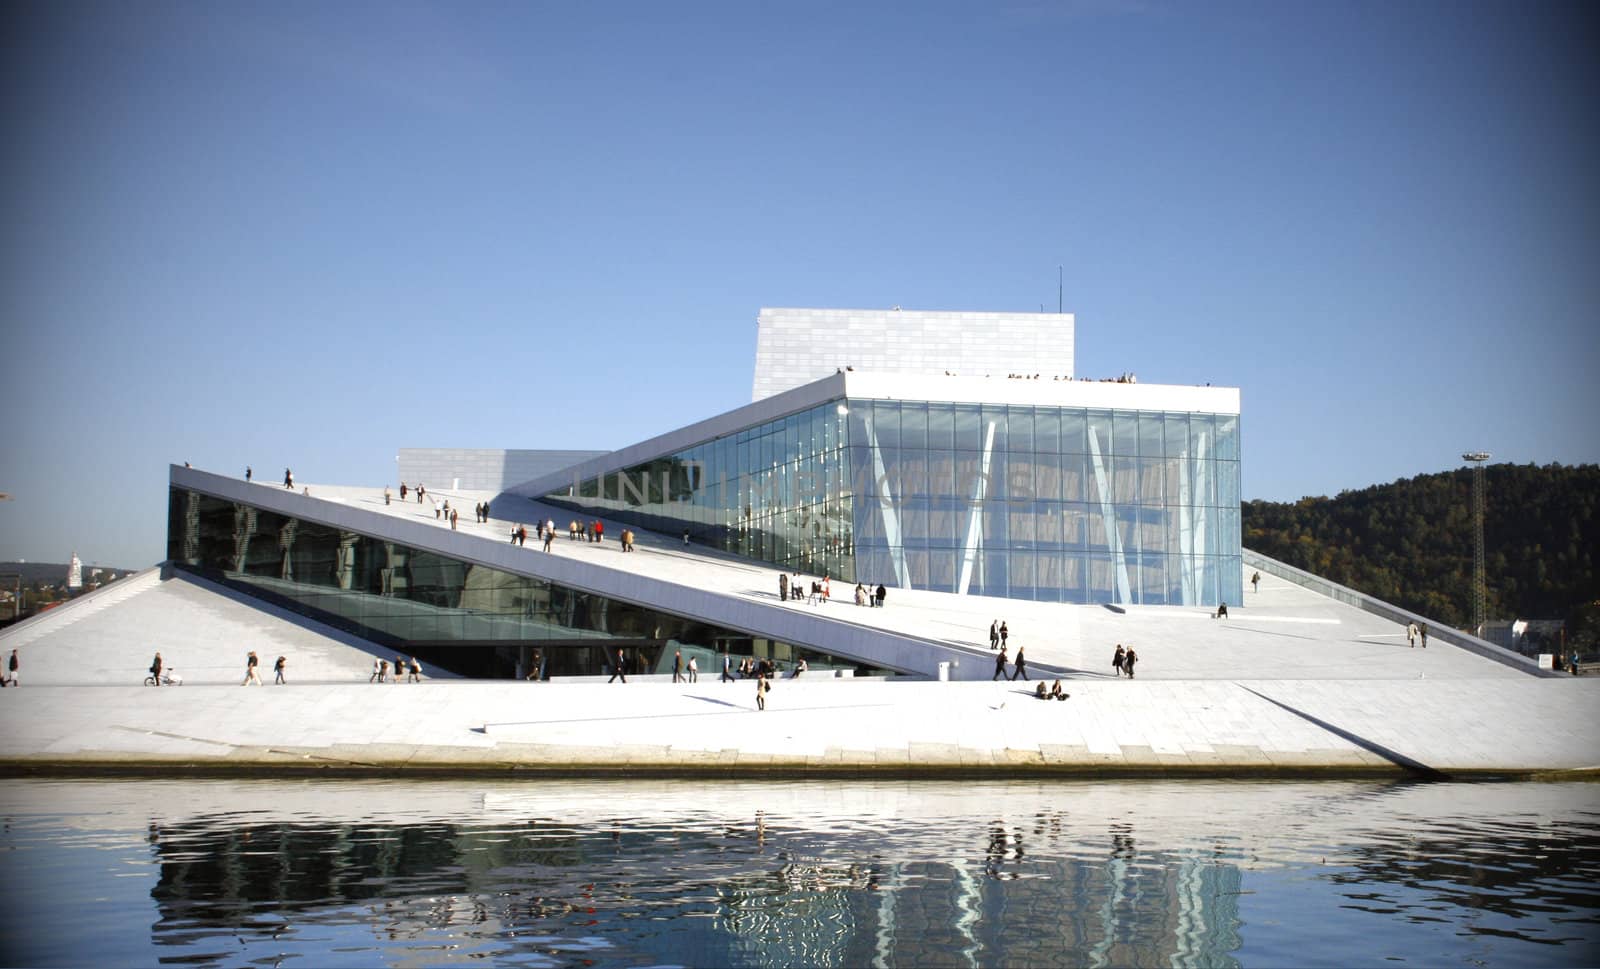 View of the new opera house in Oslo, Norway, from the ocean